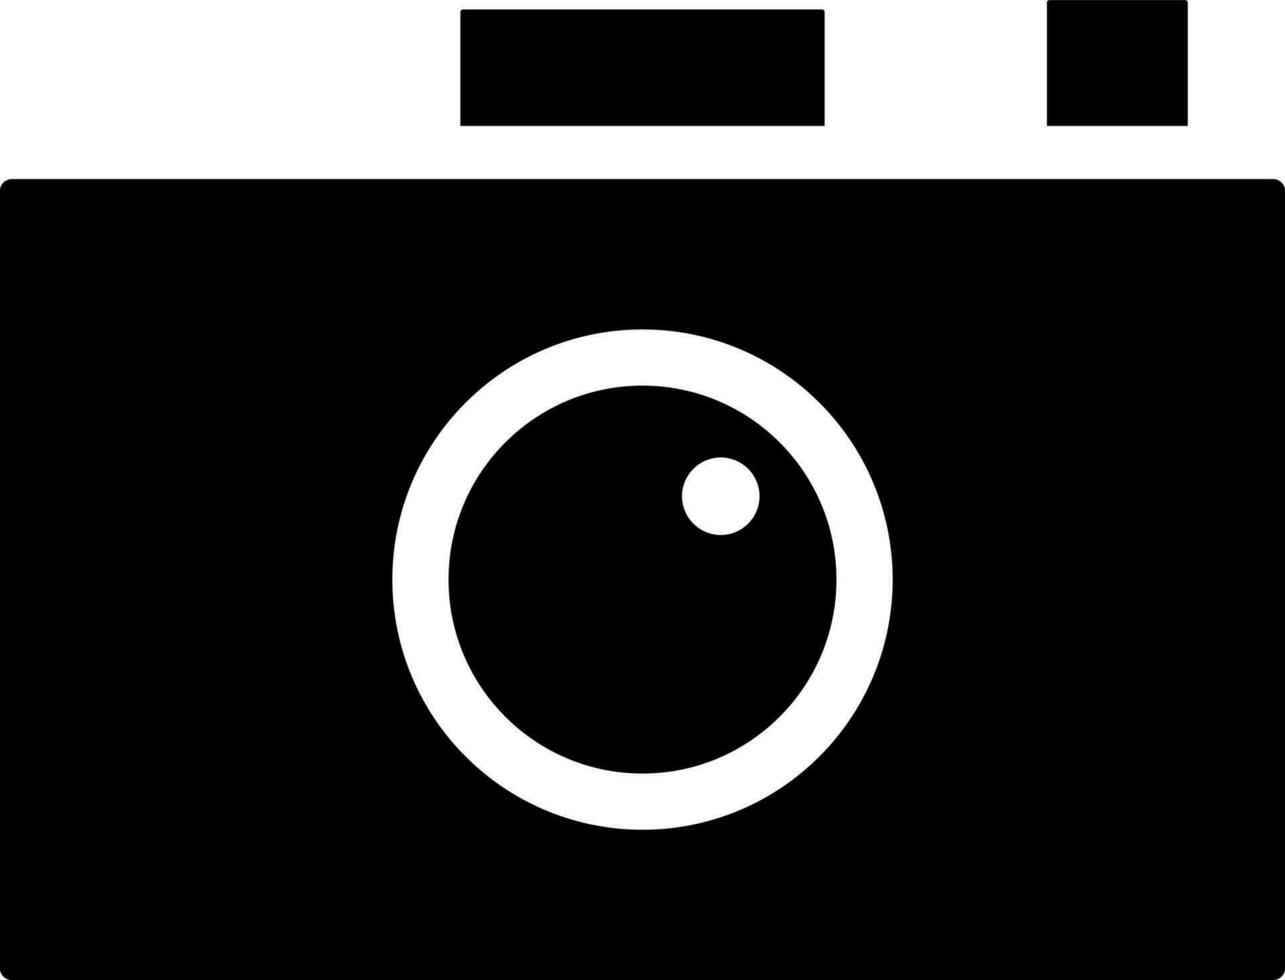 Isolated digital camera icon in Black and White color. vector